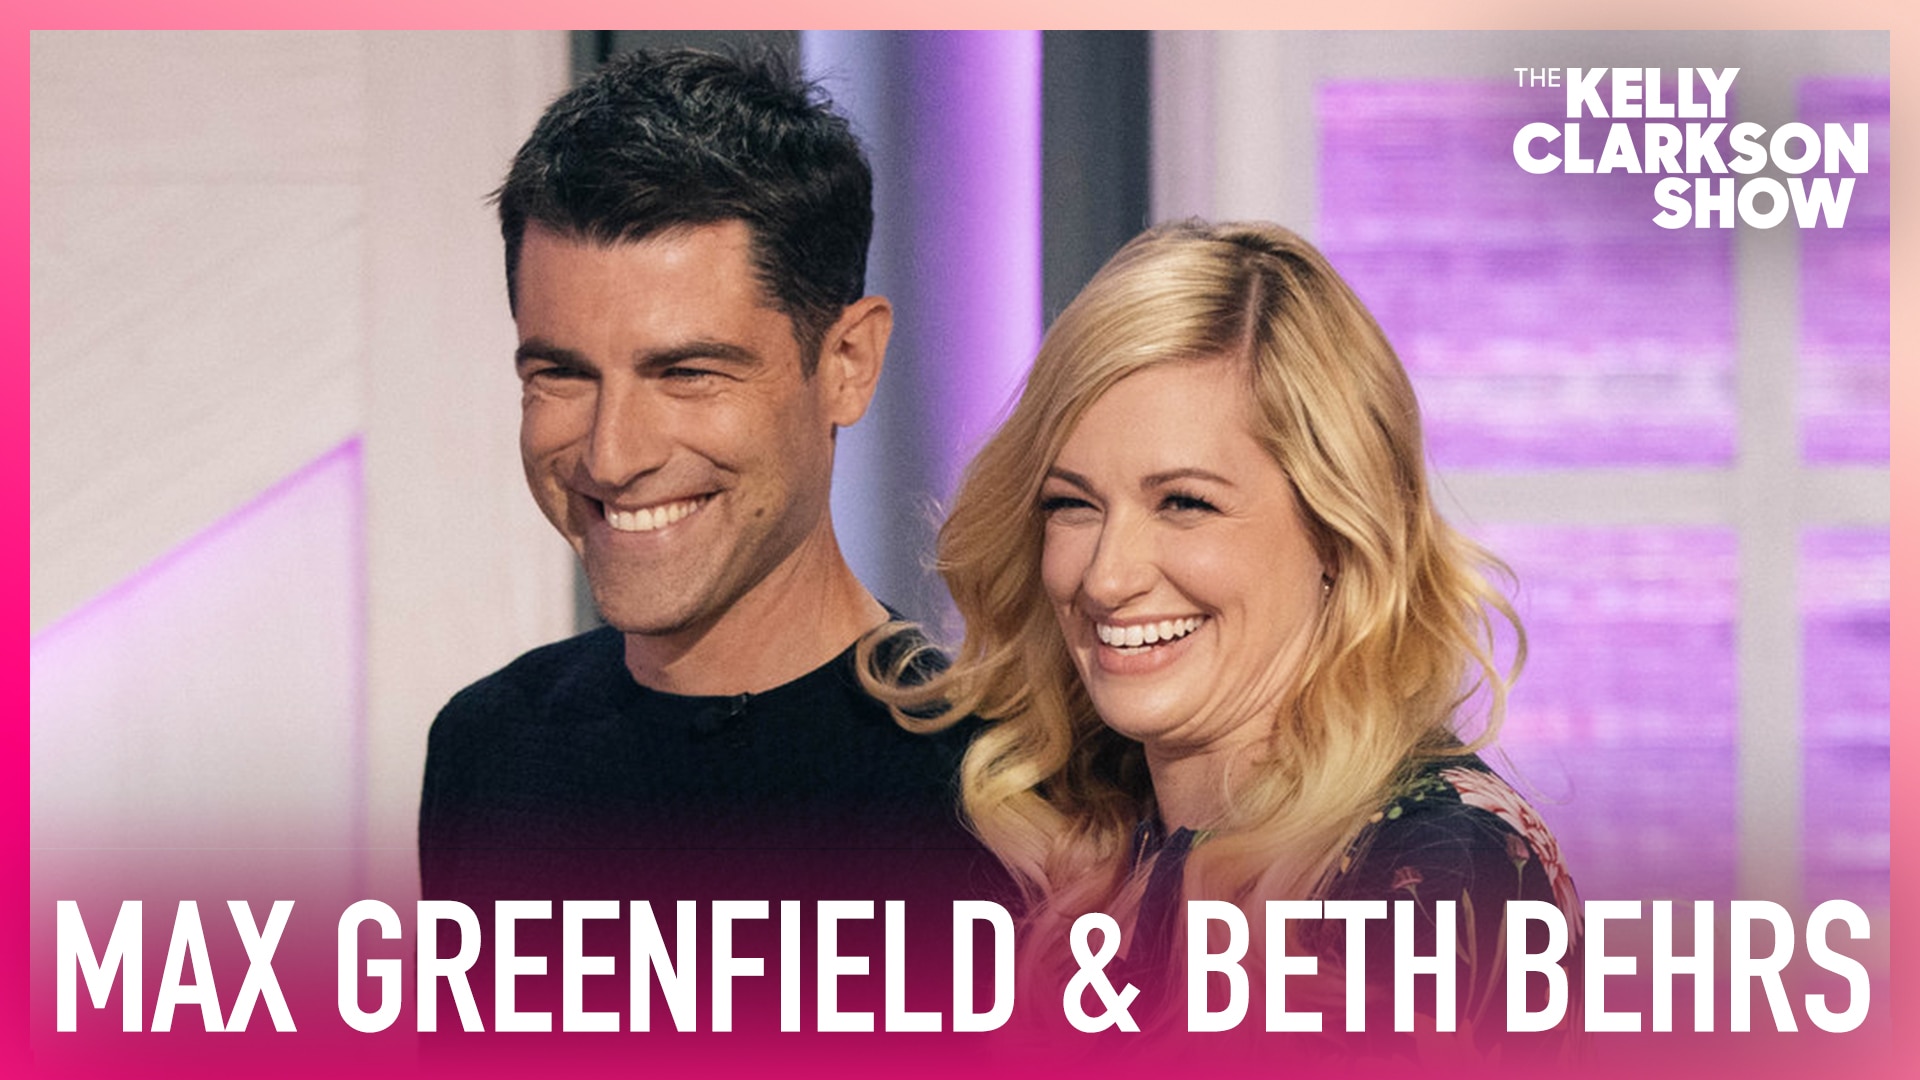 Watch The Kelly Clarkson Show Official Website Highlight Beth Behrs And Max Greenfield Want To